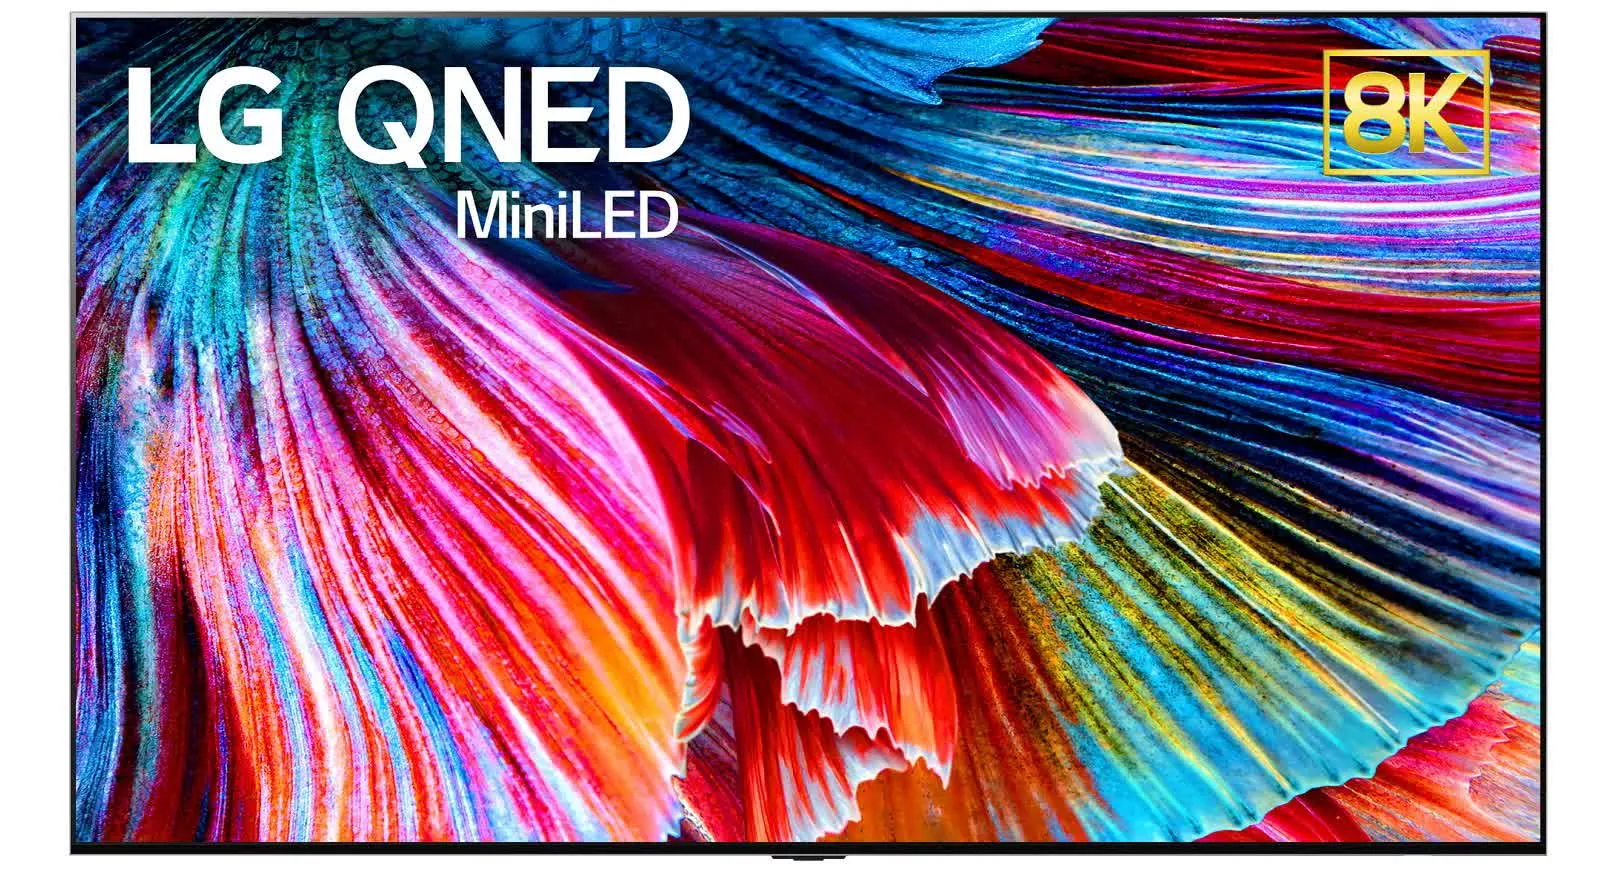 LG's 4K/8K QNED TVs with Mini LED tech arrive next year